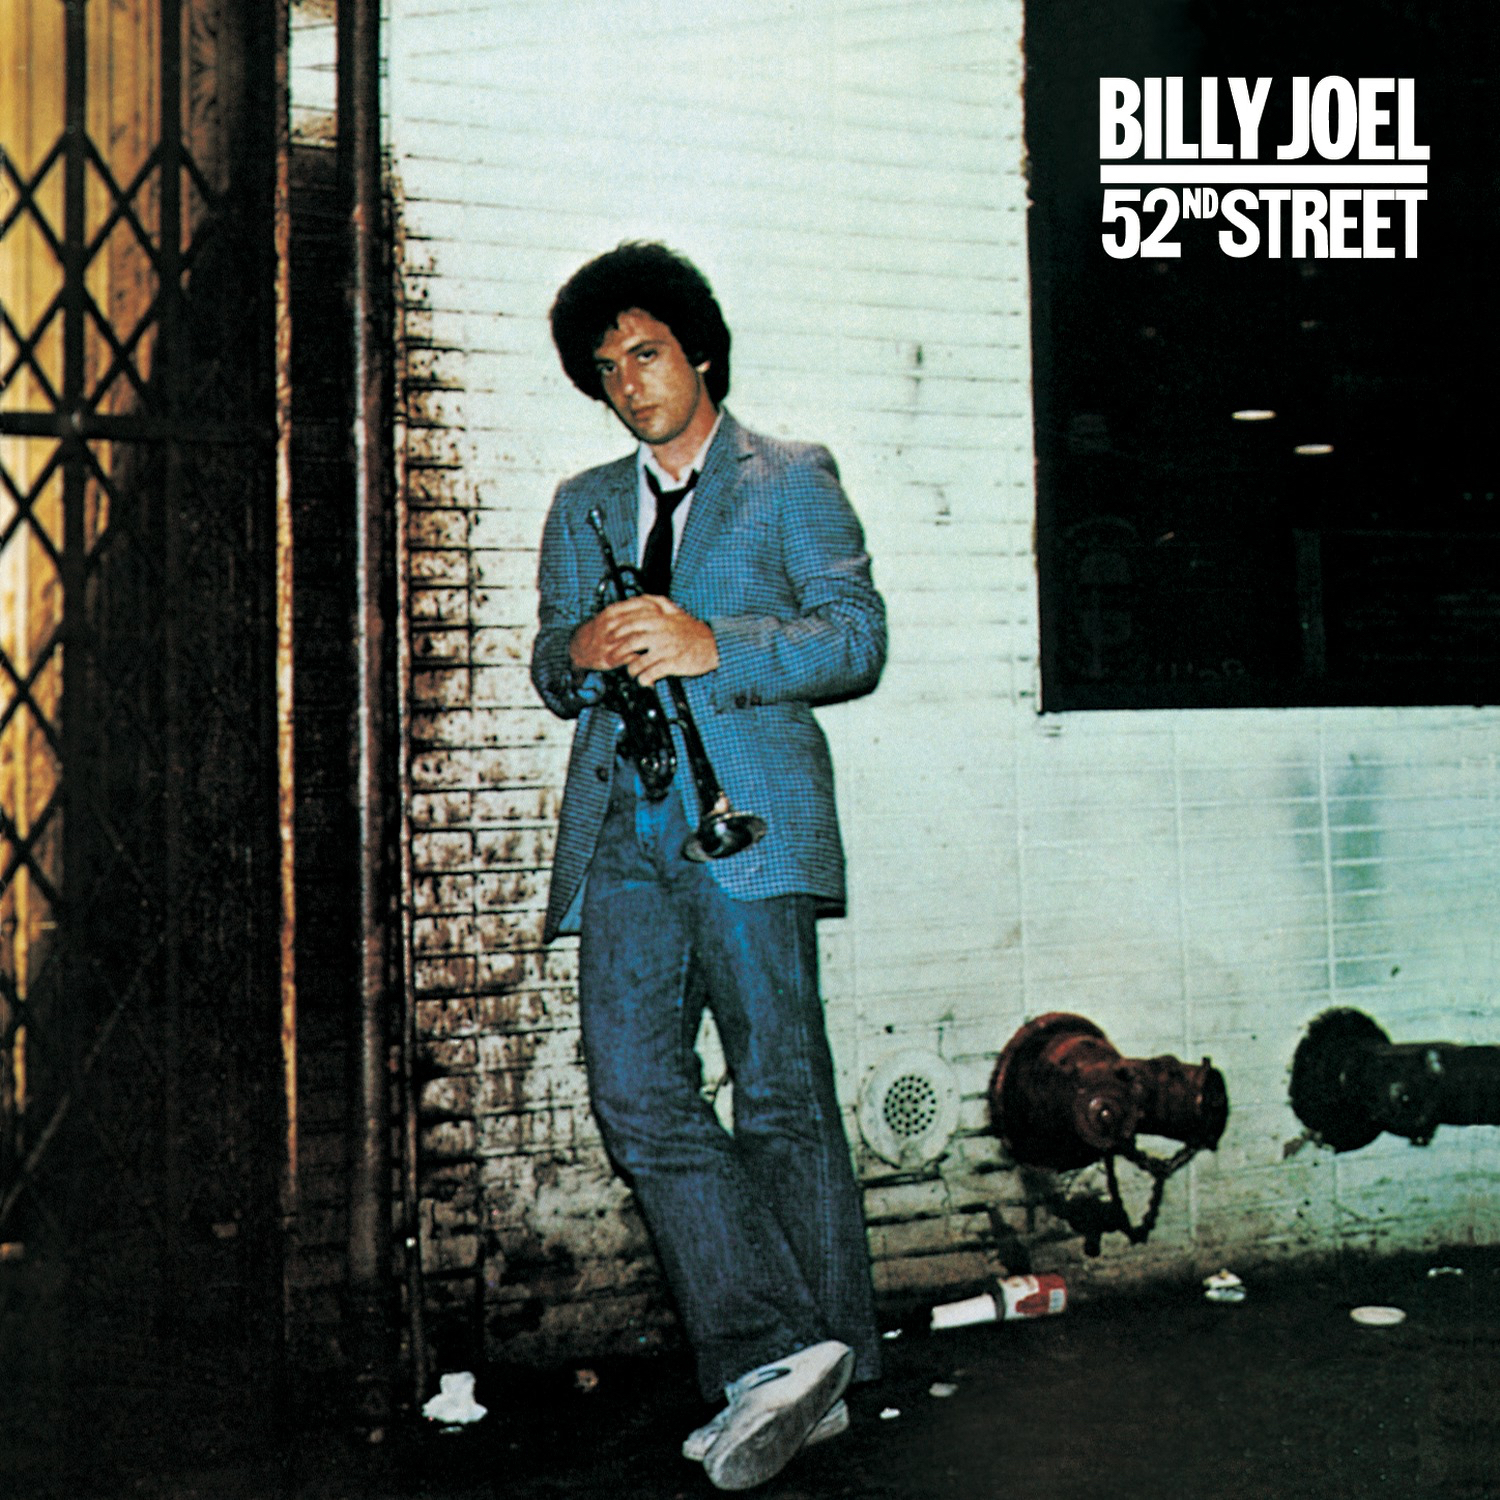 Art for THE RIVER OF DREAMS by Billy Joel